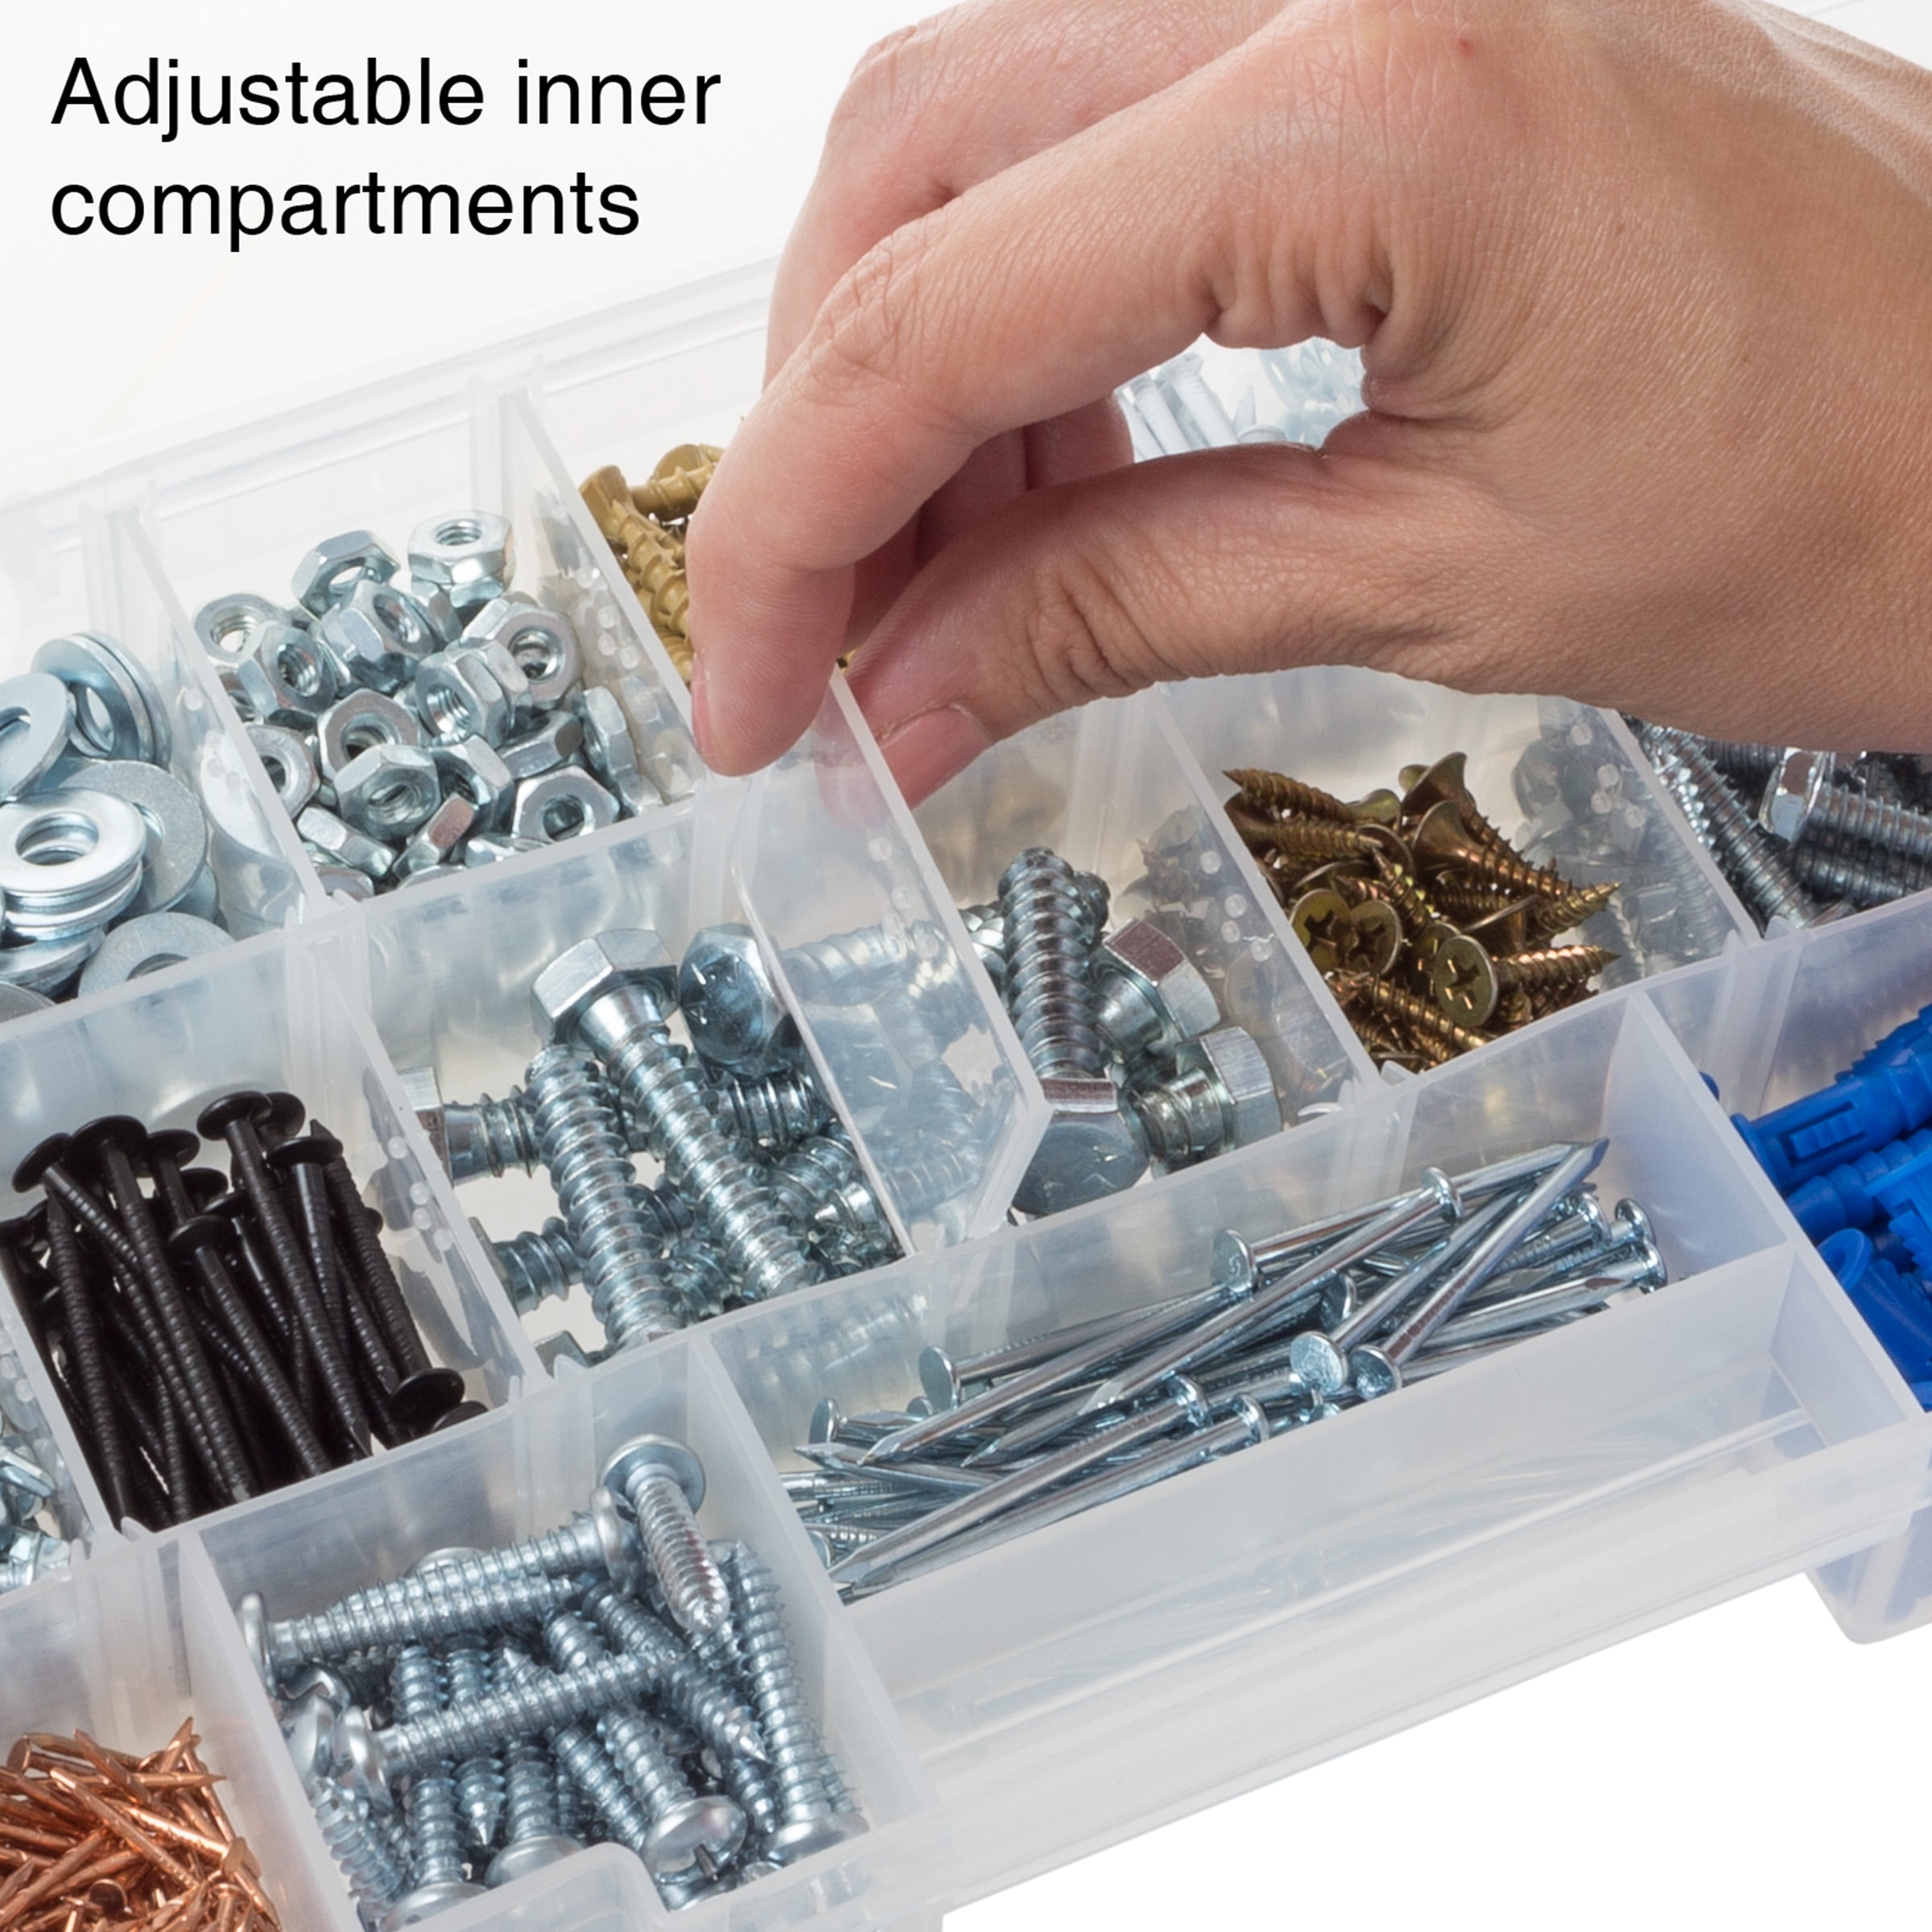 US General 99729 6 Compartment Drawer Organizer for Tools, Nails, Screws,  Tackle